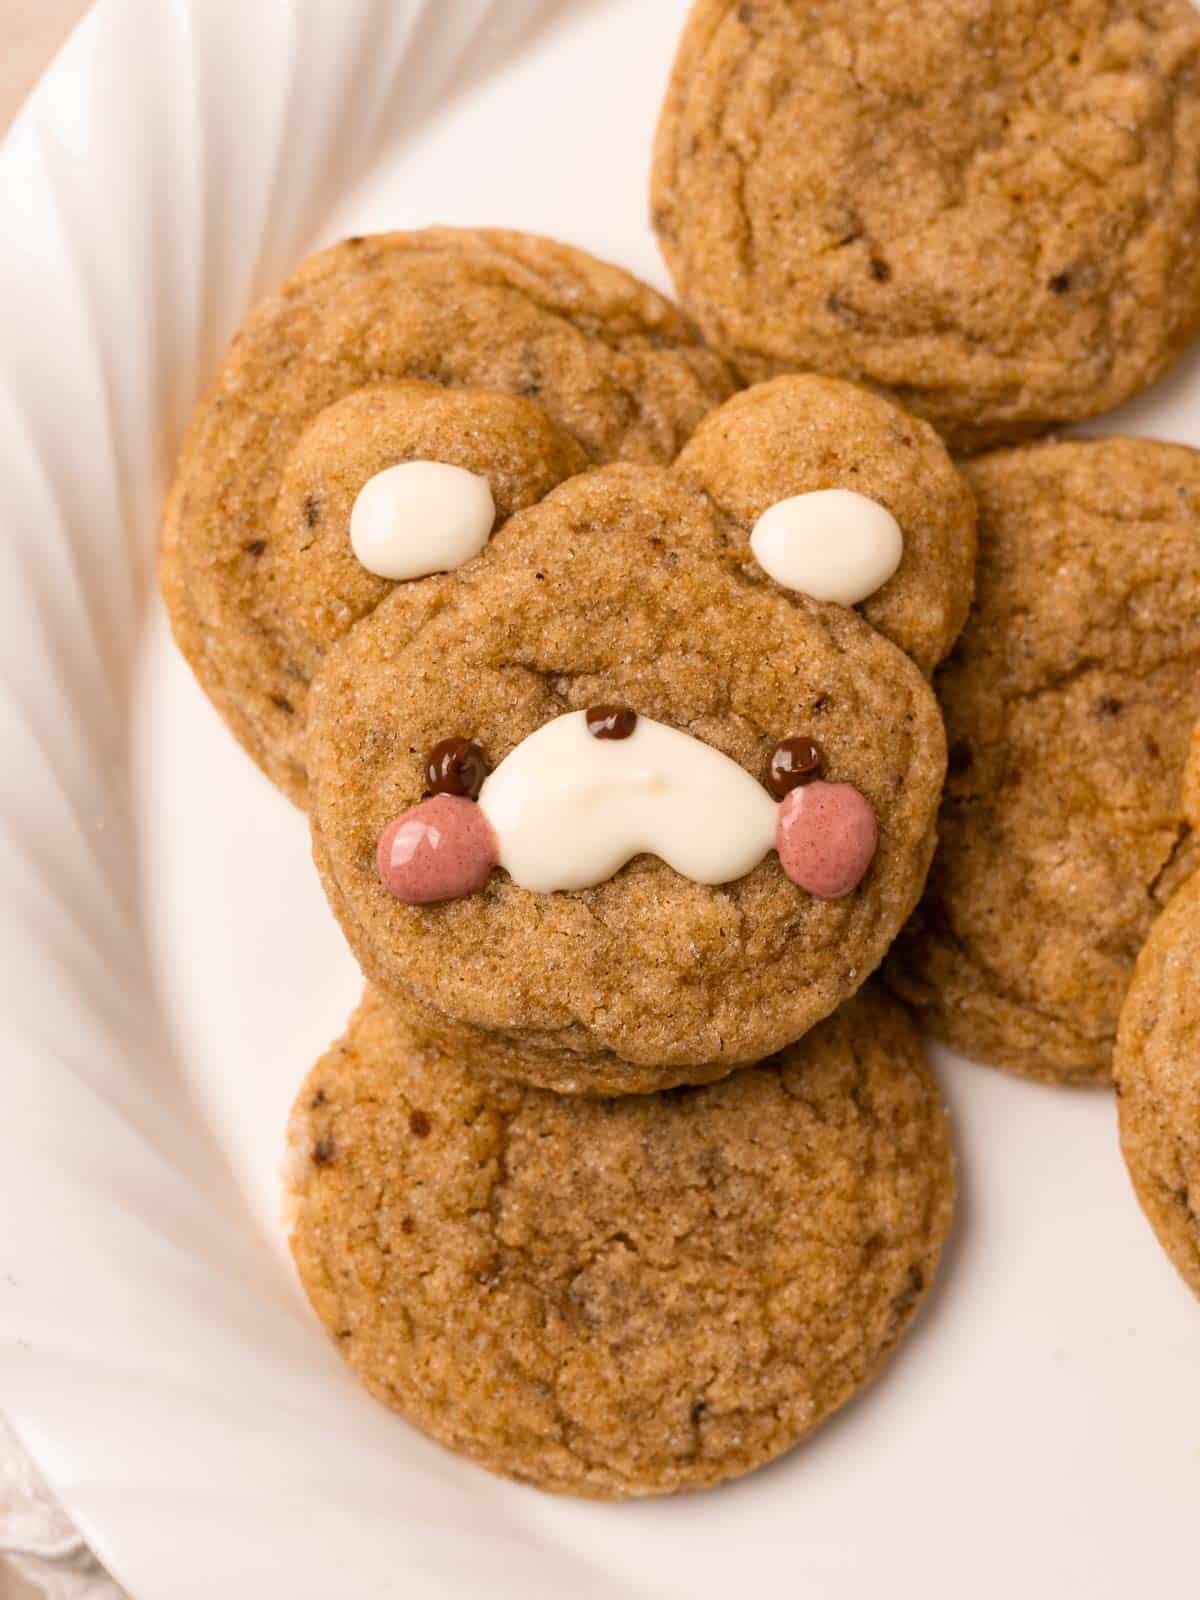 bear cookies made with brown butter on a white plate. shot using my new food photography gear, Canon EOS R6 MII and 50 mm f/1.8 lens.